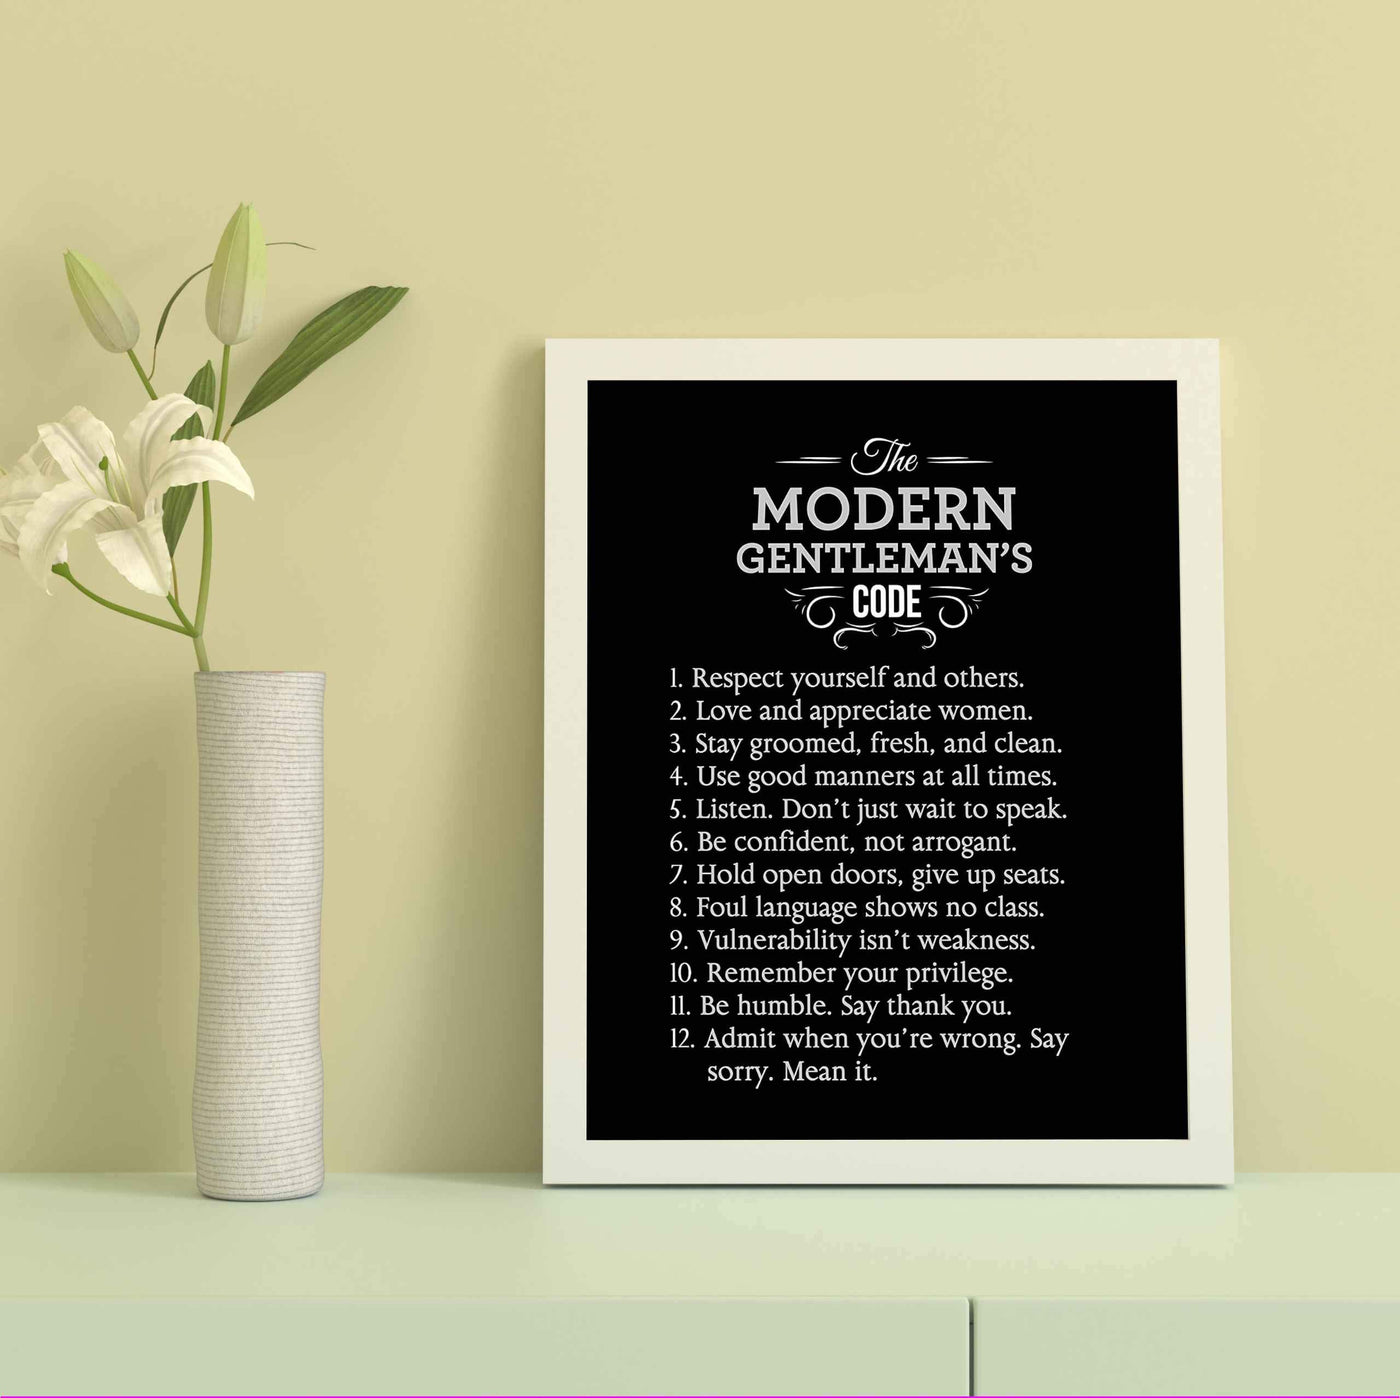 The Modern Gentleman's Code Motivational Quotes Wall Art Sign -8 x 10" Vintage Typographic Poster Print-Ready to Frame. Perfect Home-Office-Man Cave-Shop Decor. Great Advice for All Gentlemen!